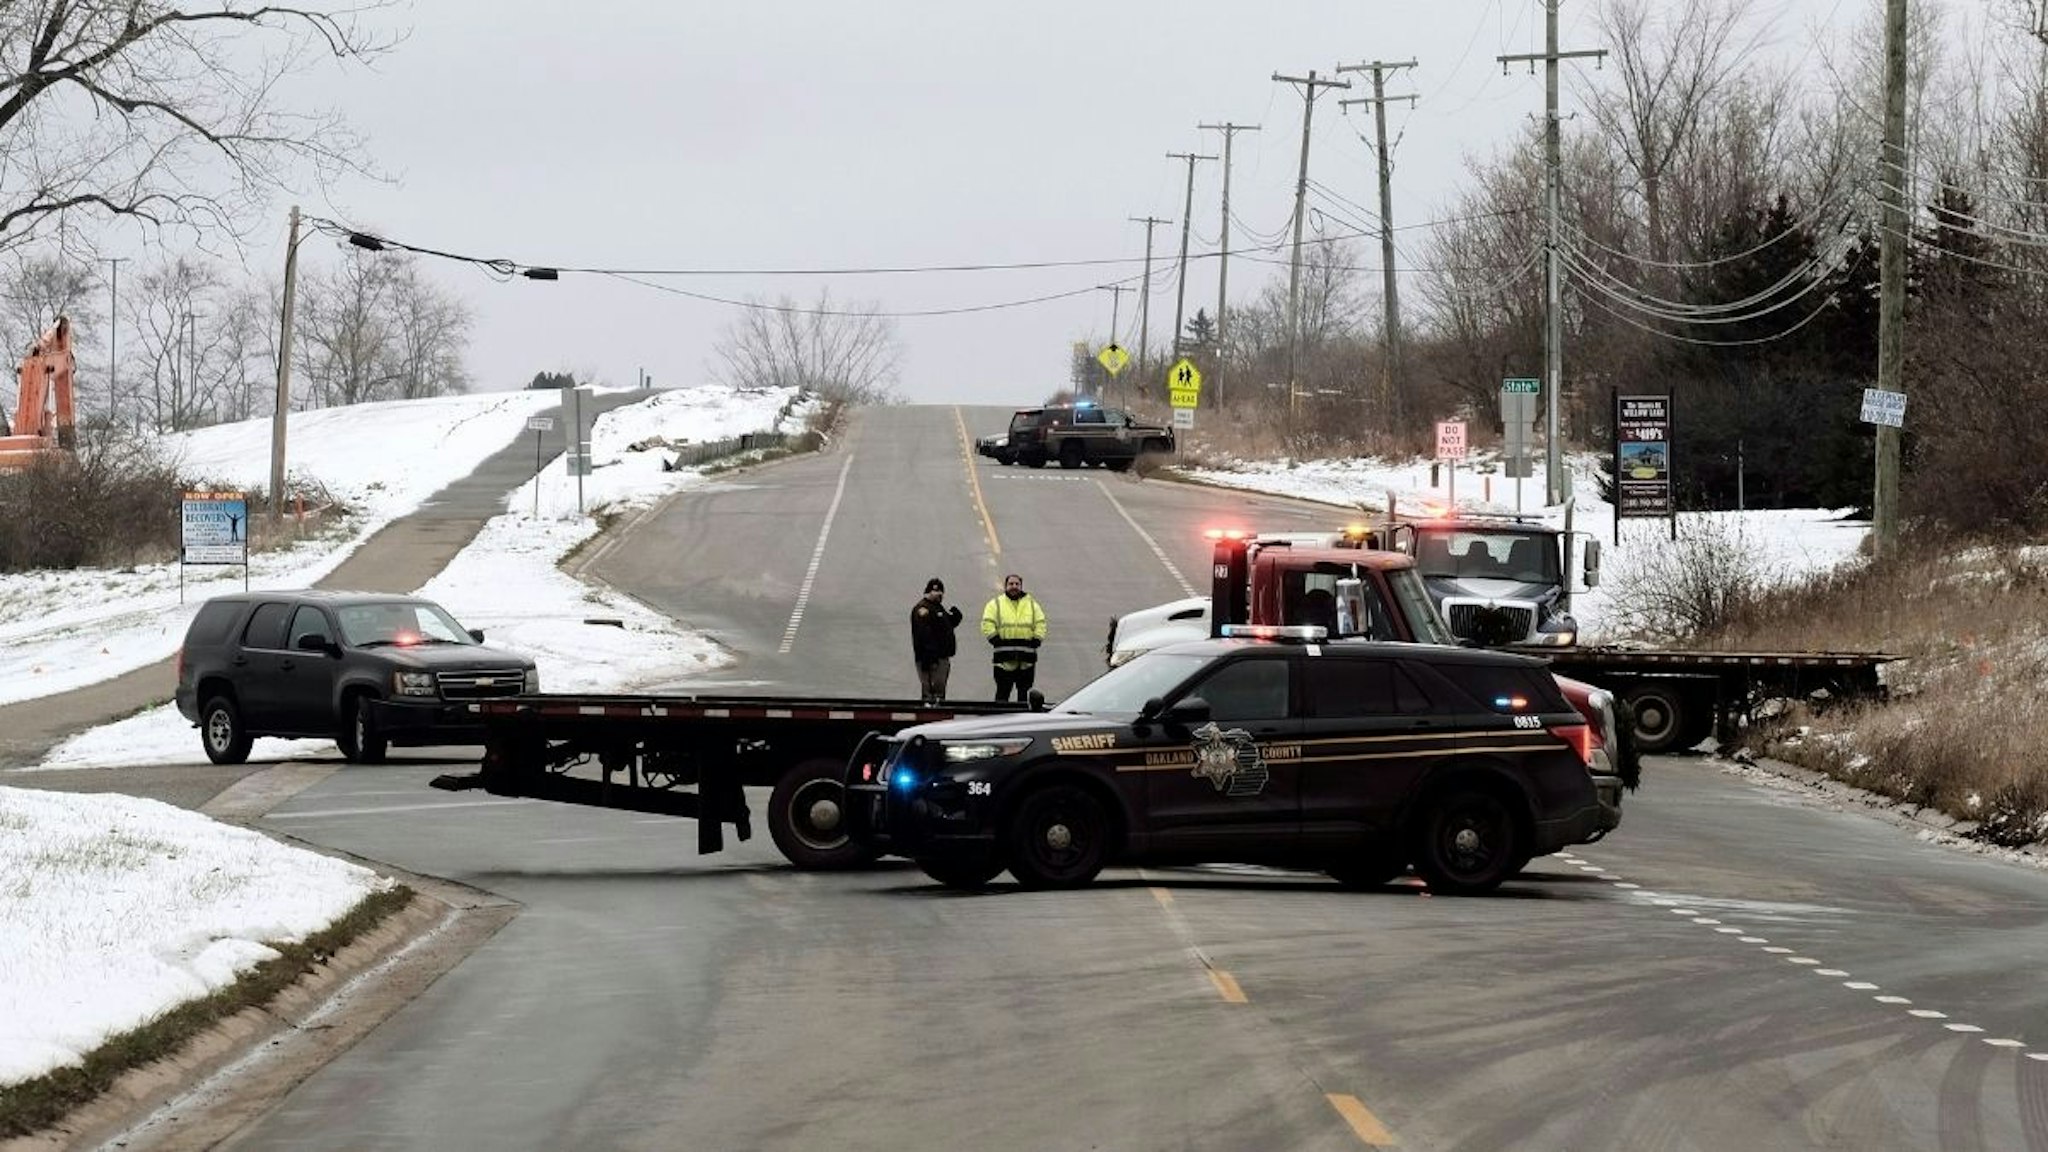 A police road block restricts access to Oxford High School following a shooting on November 30, 2021 in Oxford, Michigan.